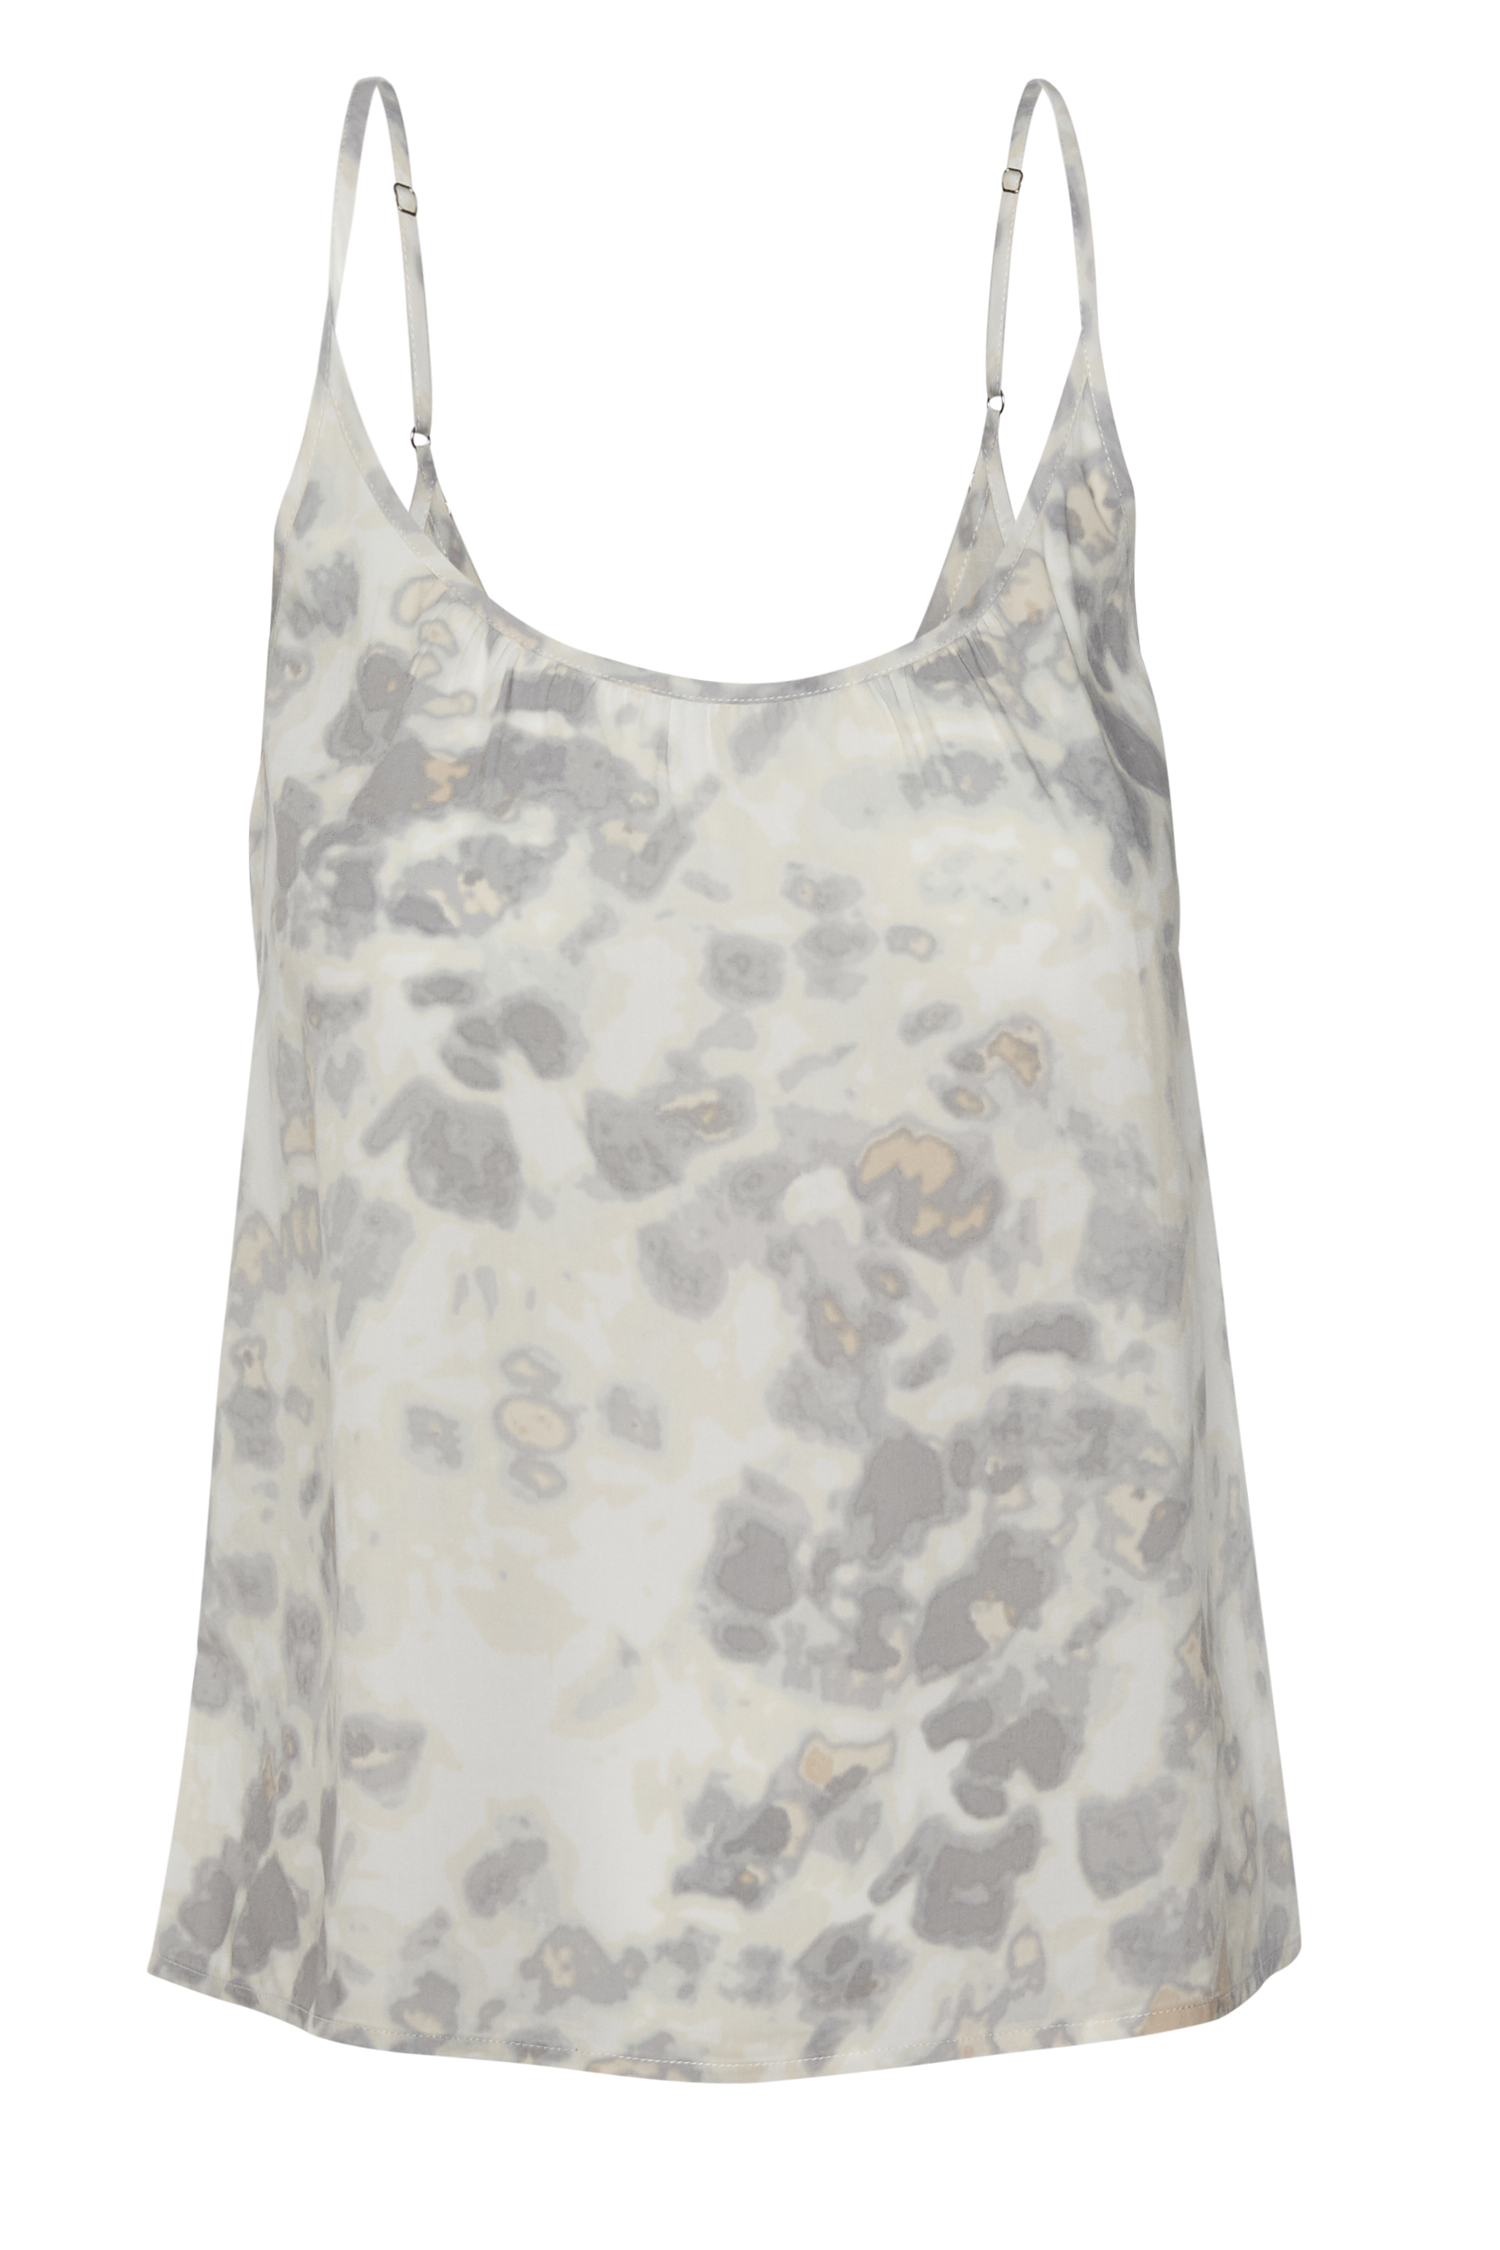 Tart Collections Watercolor Print Cami